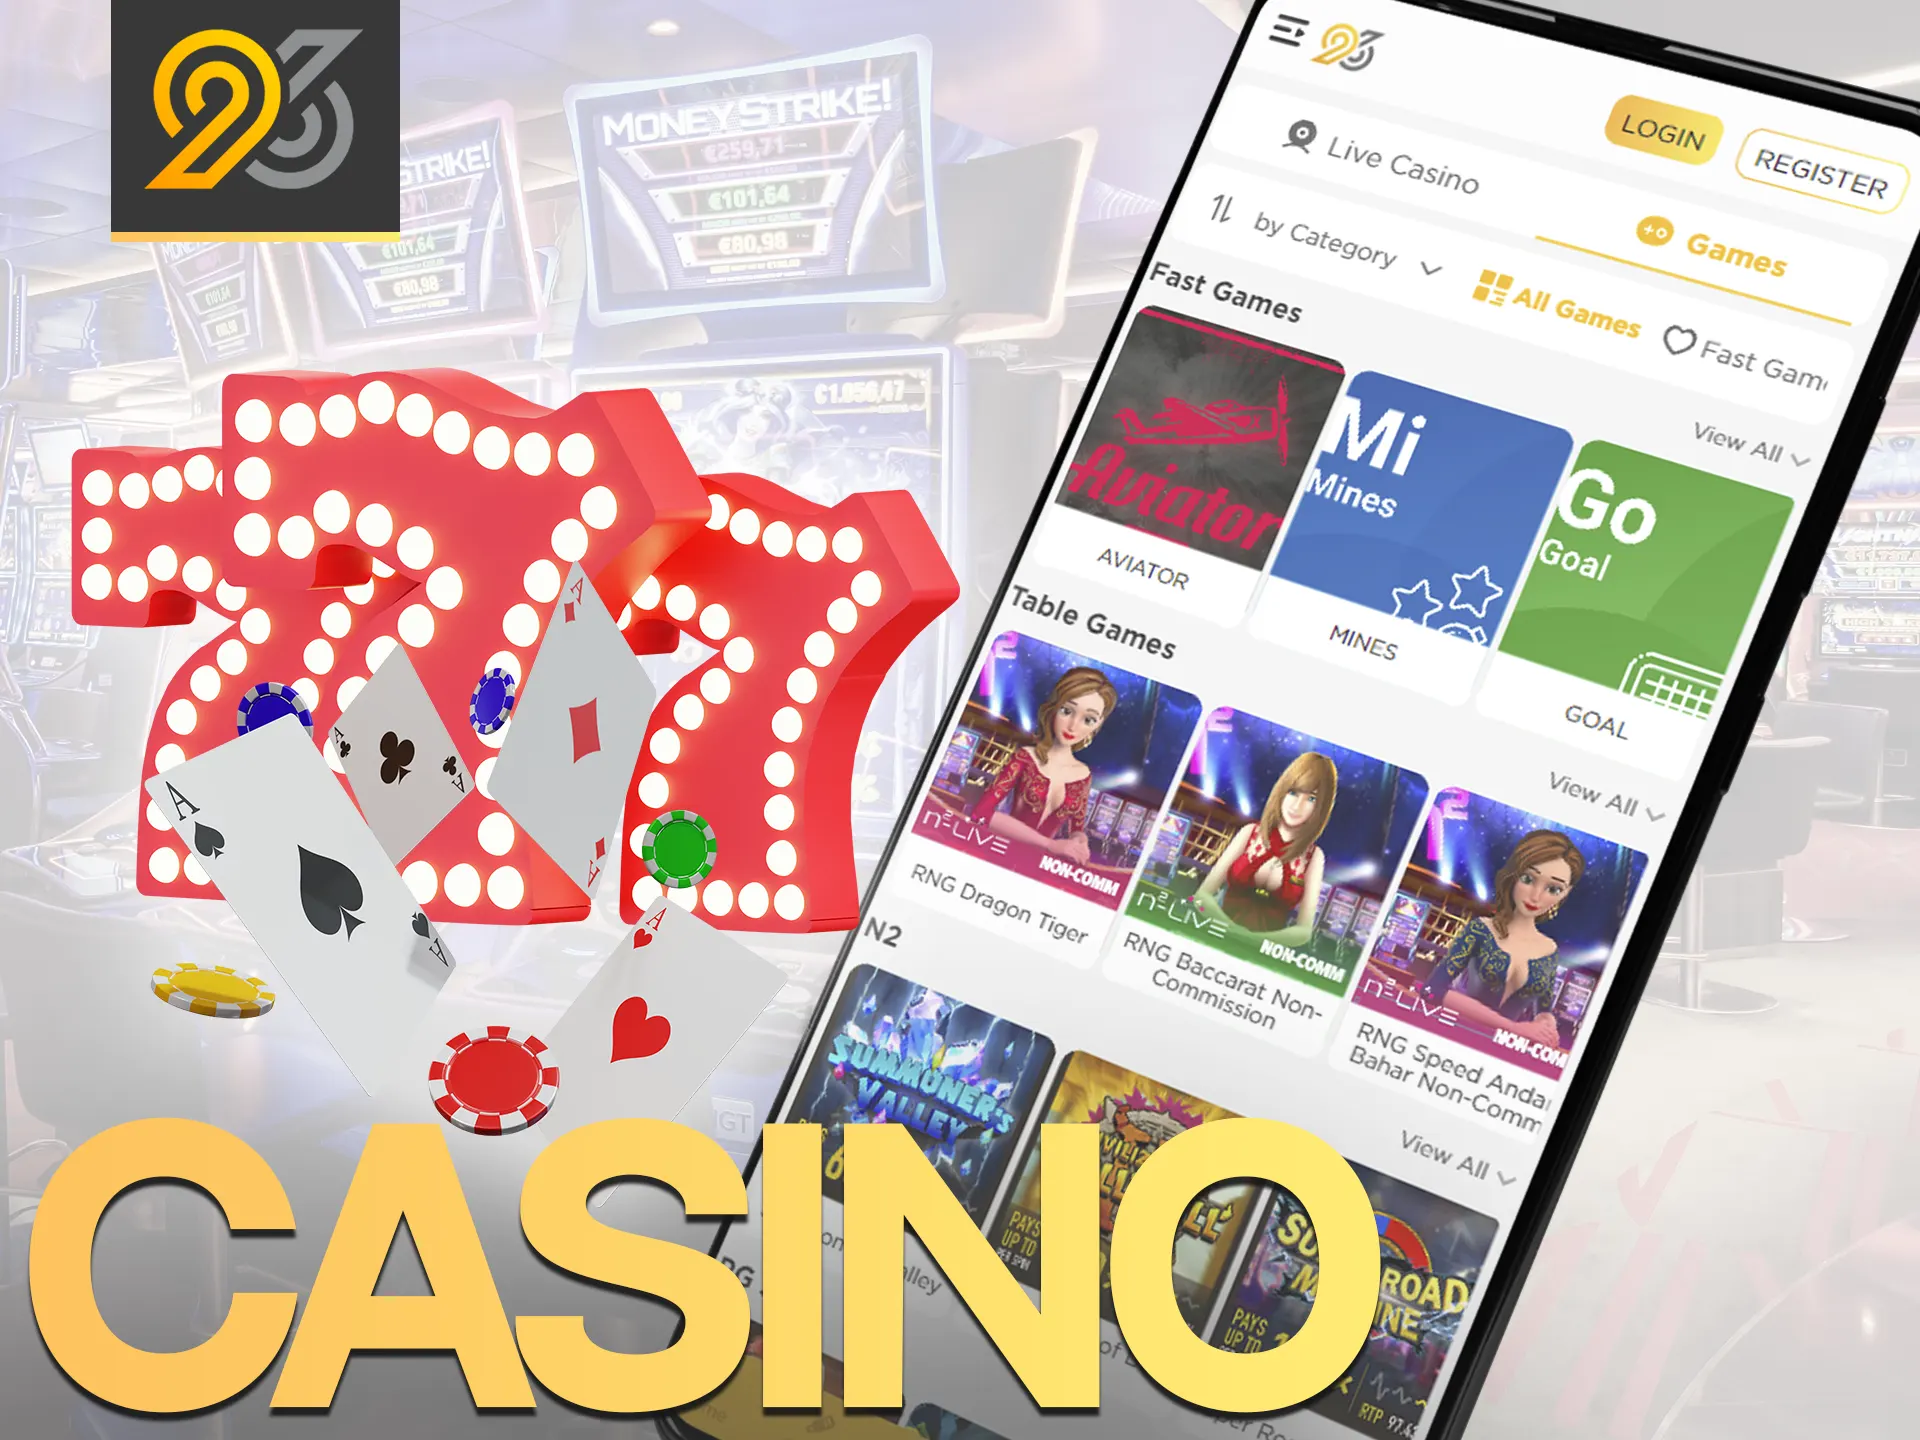 The 96in mobile app includes the same casino games as the website.